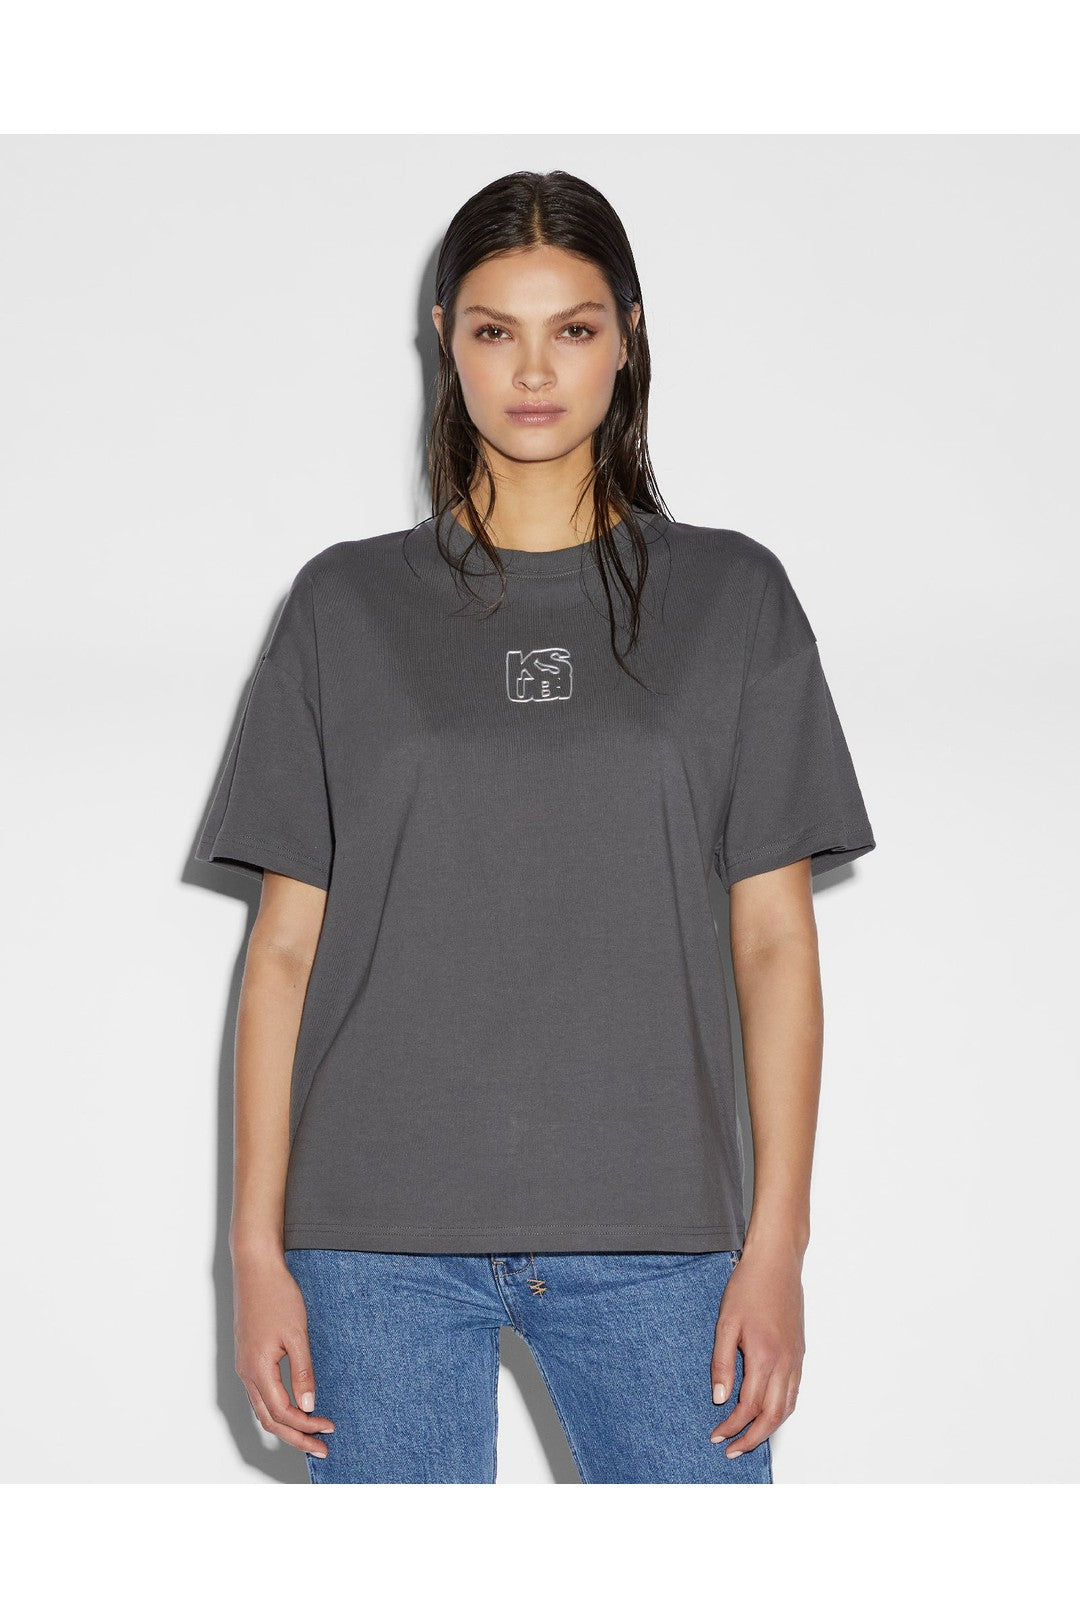 Stacked Oh G Ss Tee, Charcoal